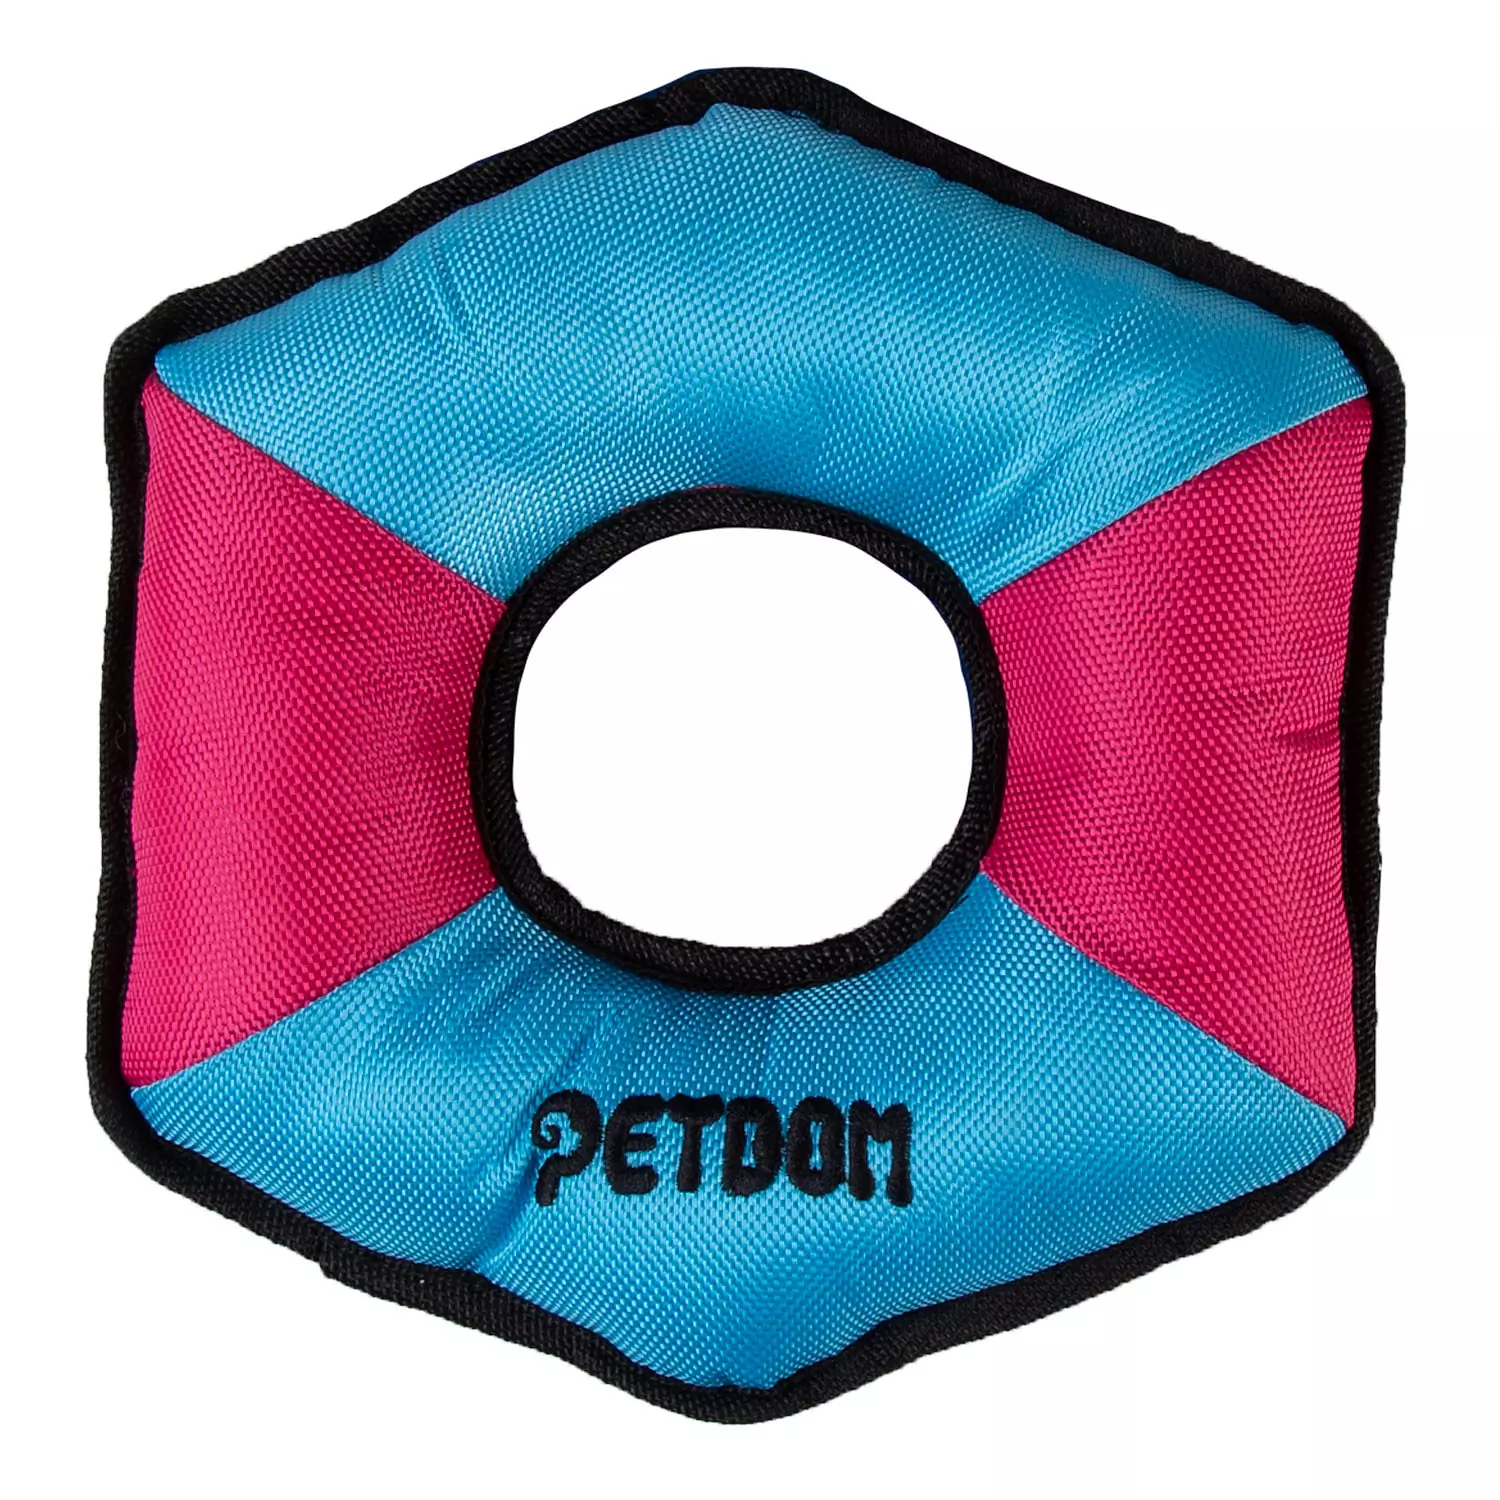 Petdom - Squeaky chew toy for dogs, pink/blue hexagon